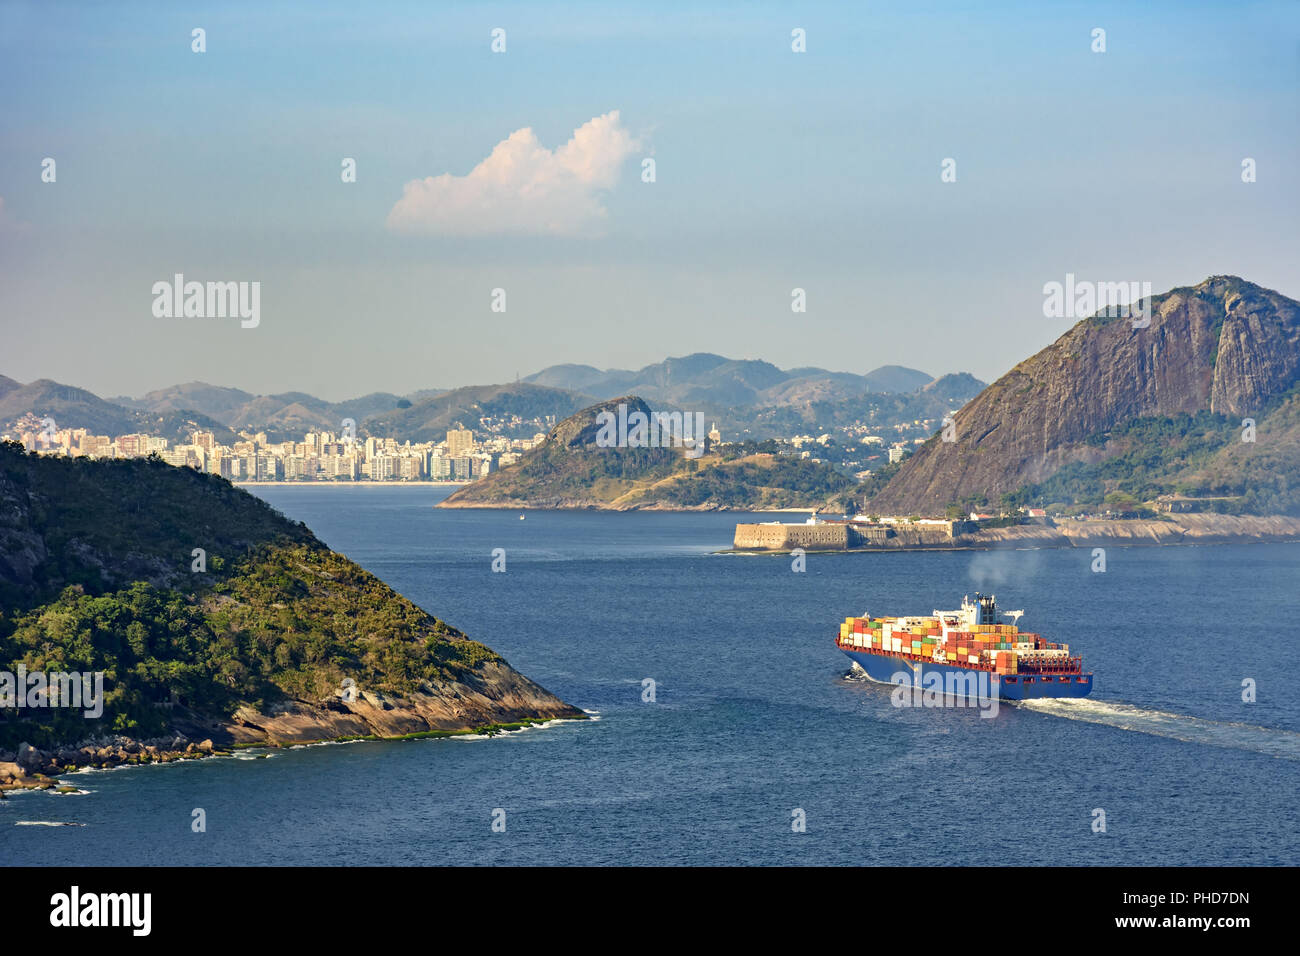 Cargo ship, loaded with containers, entering the Guanabara bay Stock Photo